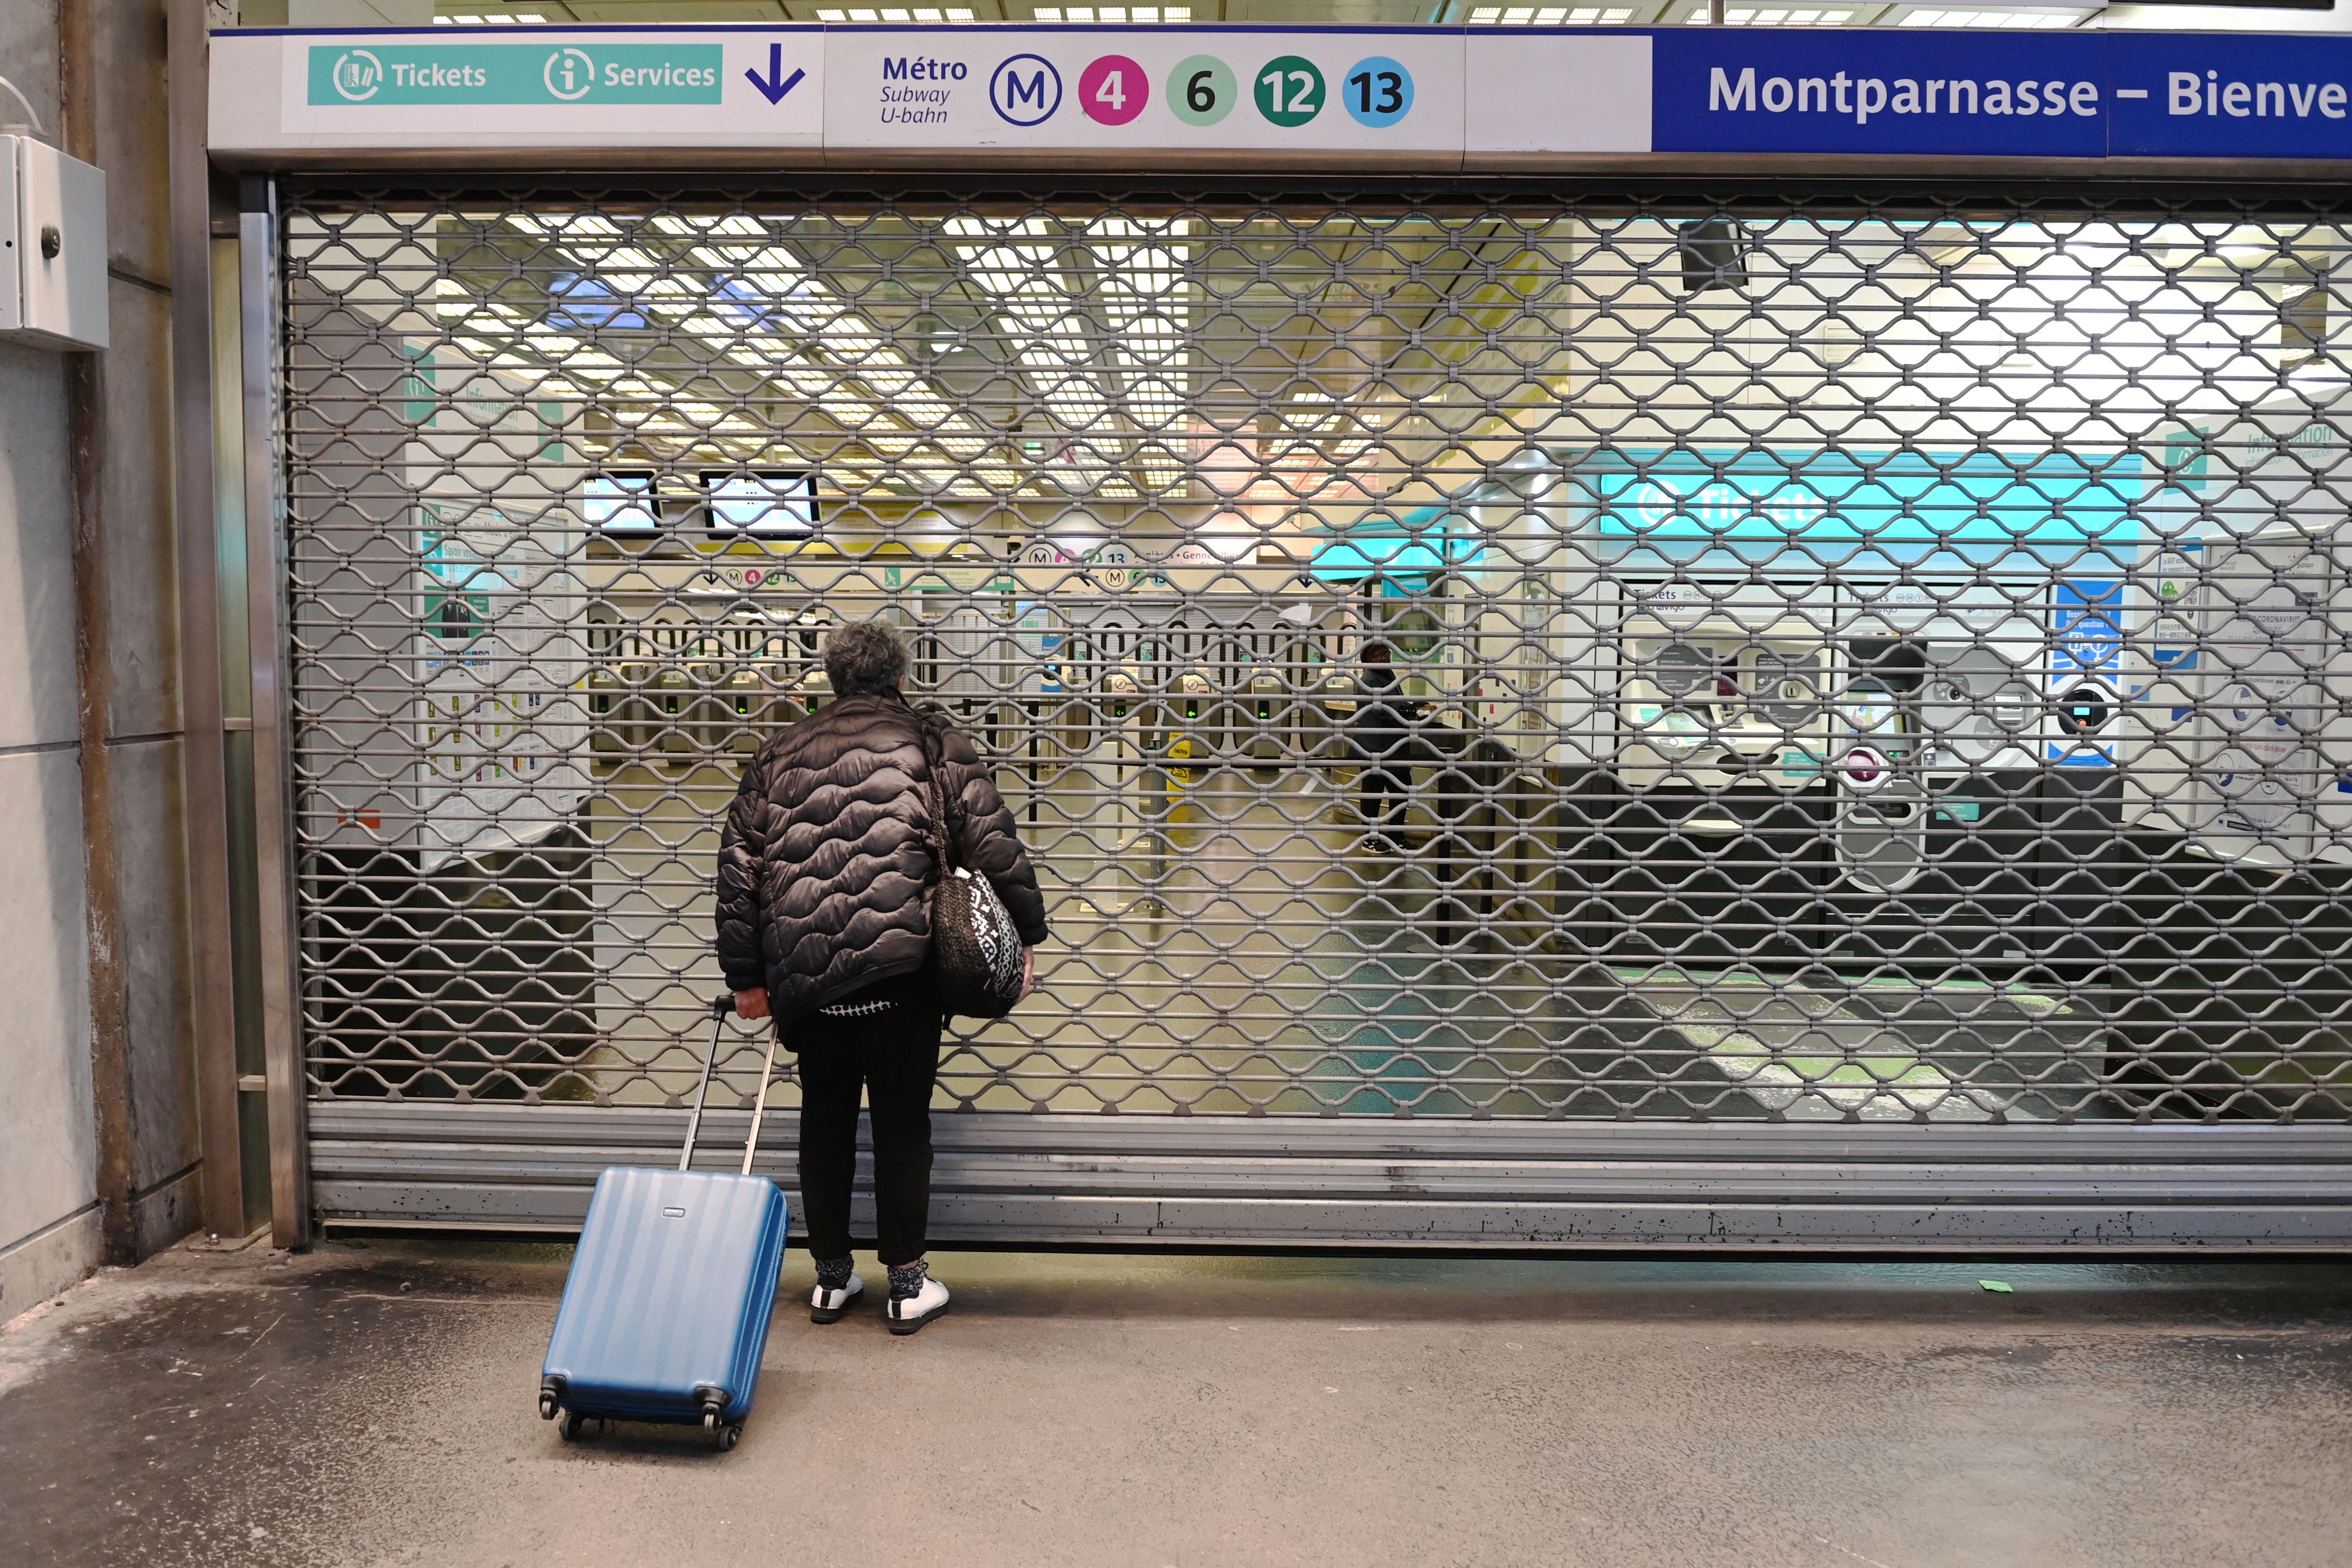 A passenger stands near the closed gate of the Montparnasse-Bienvenue Metro in Paris during industrial action